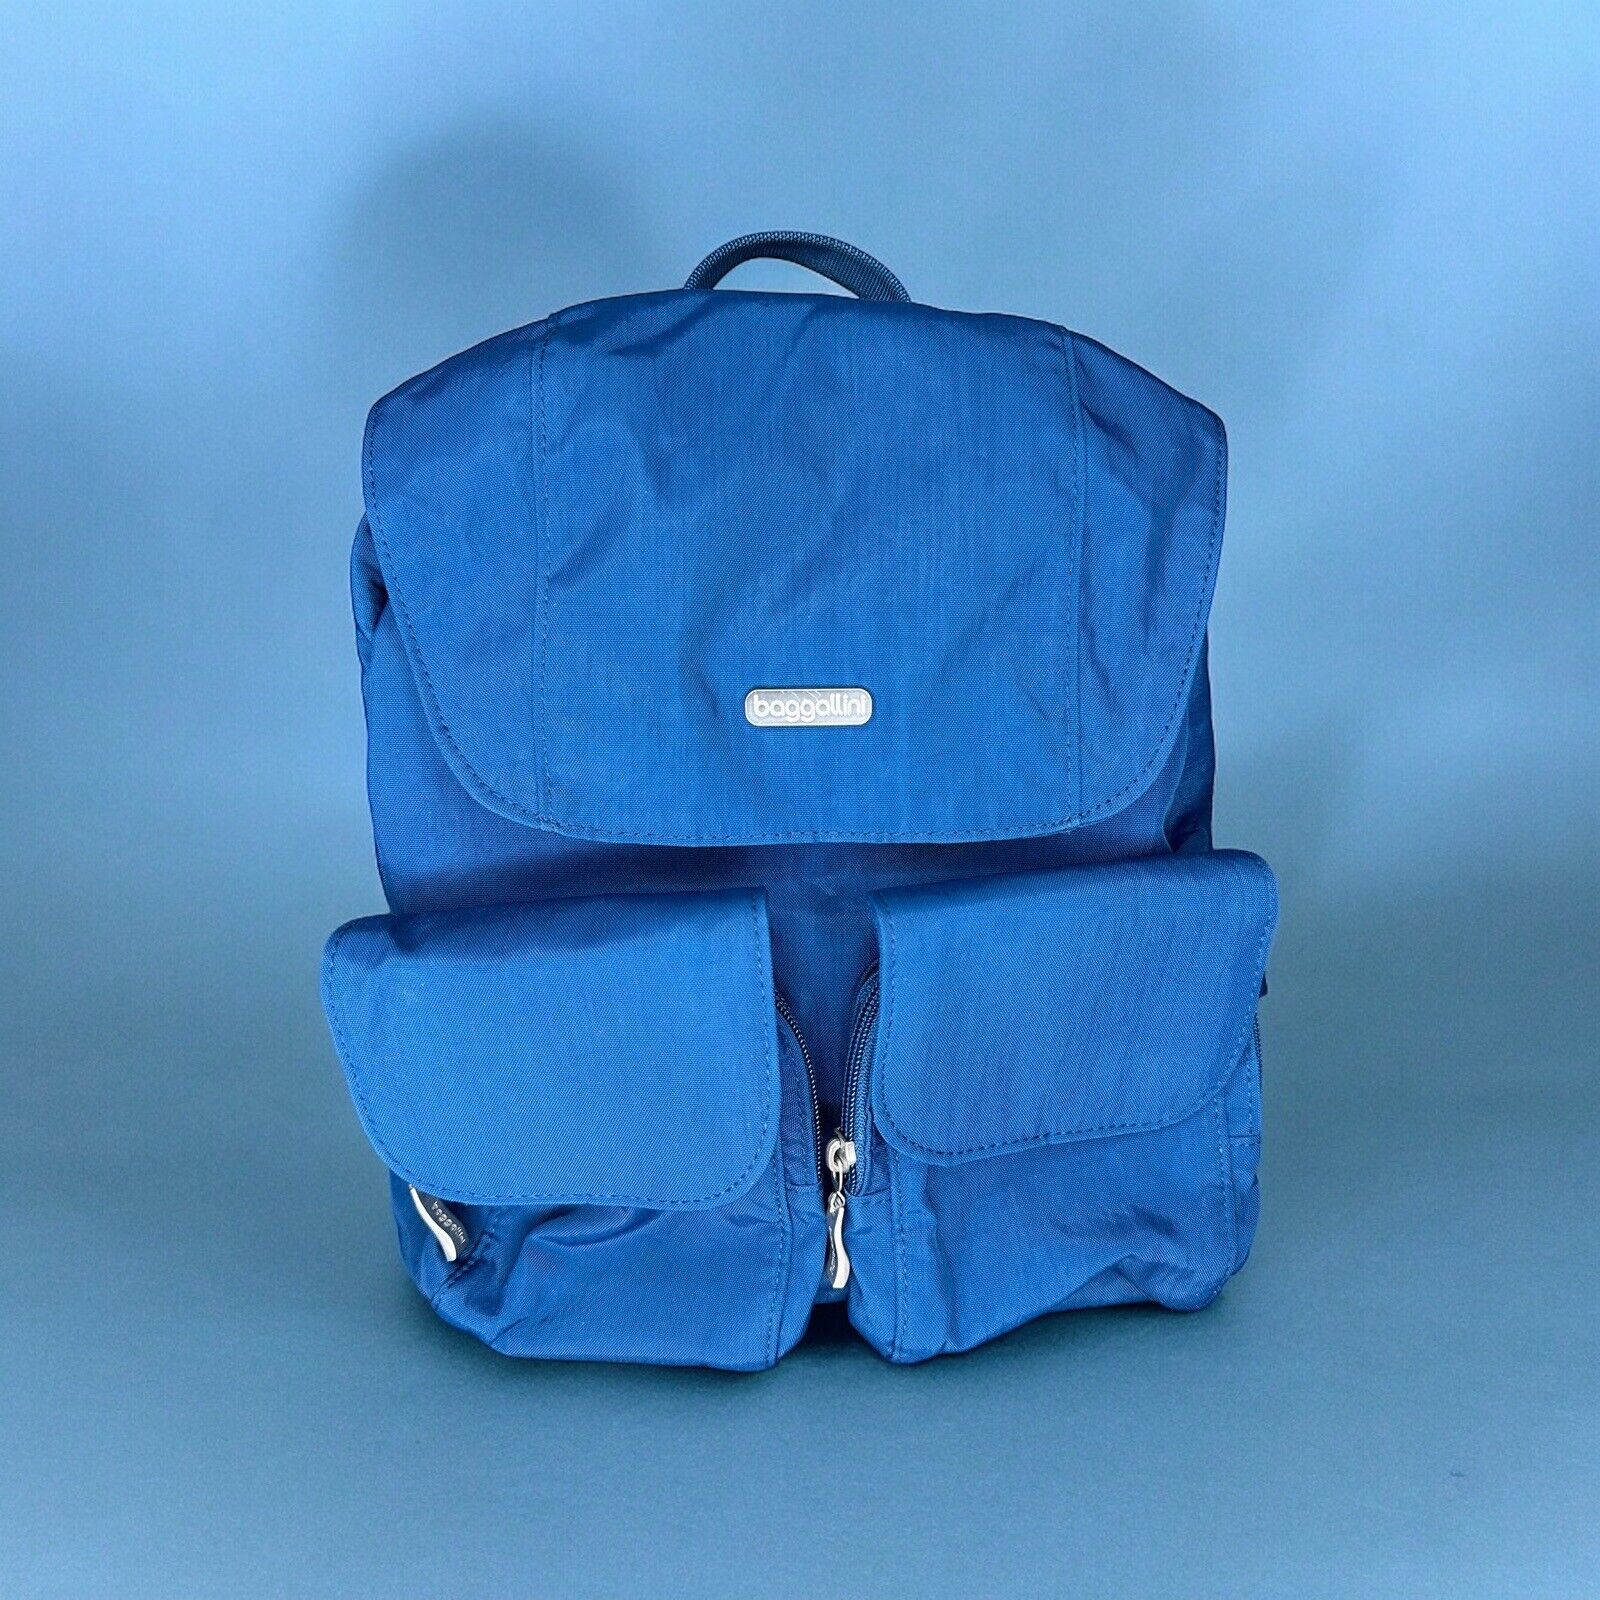 Baggallini Mission Mid- Size Blue Textured Nylon Travel Backpack